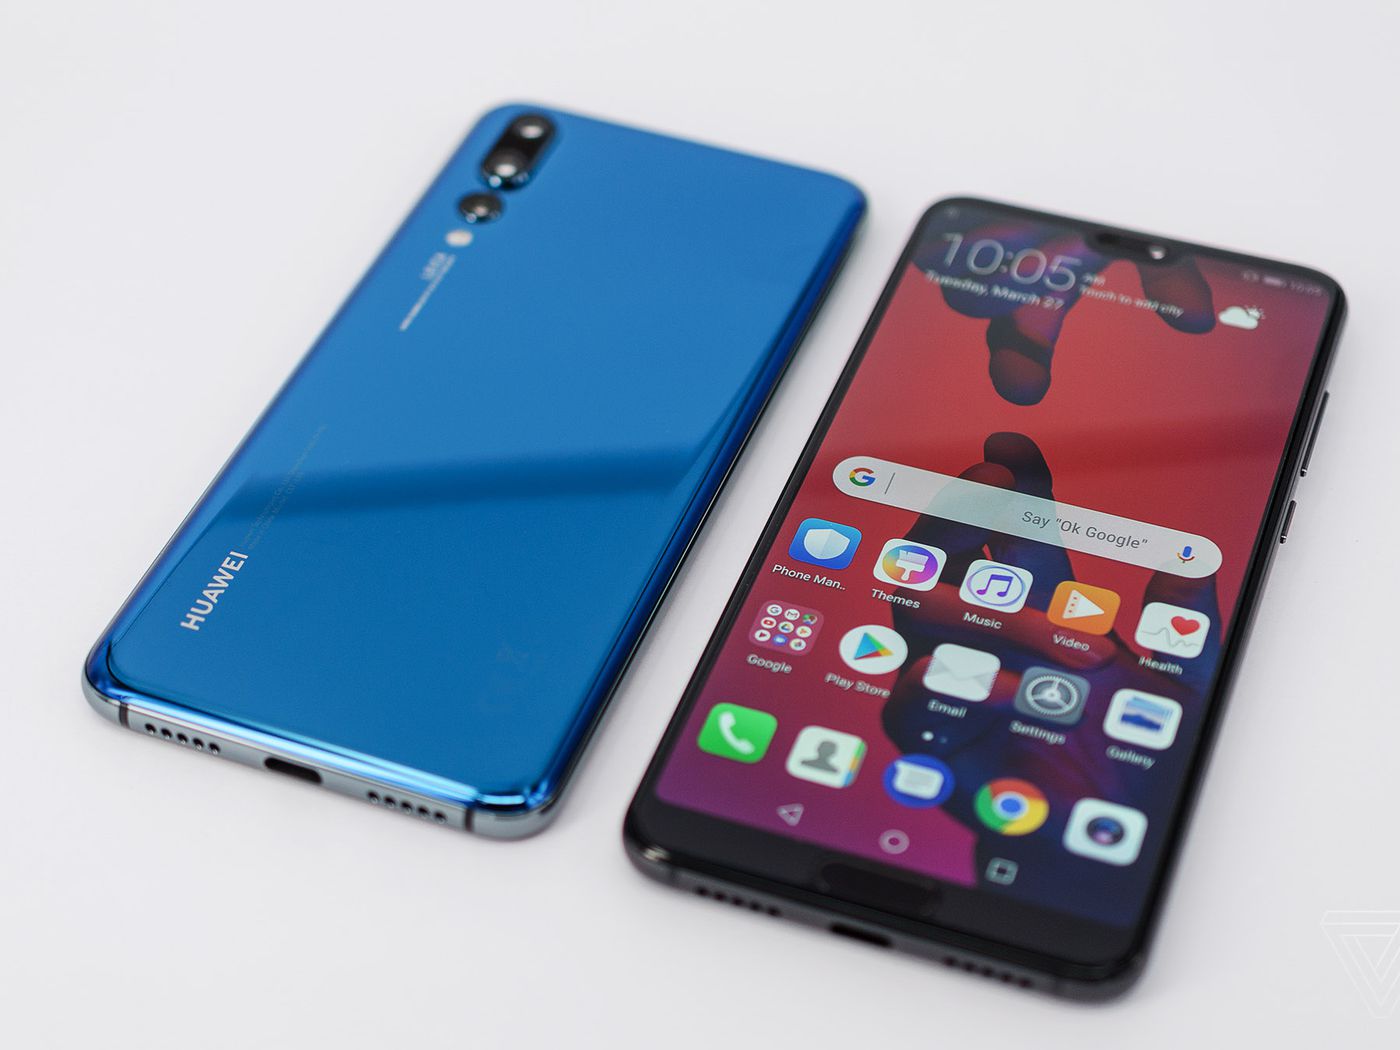 Price of Huawei Phones In South Africa and Specs